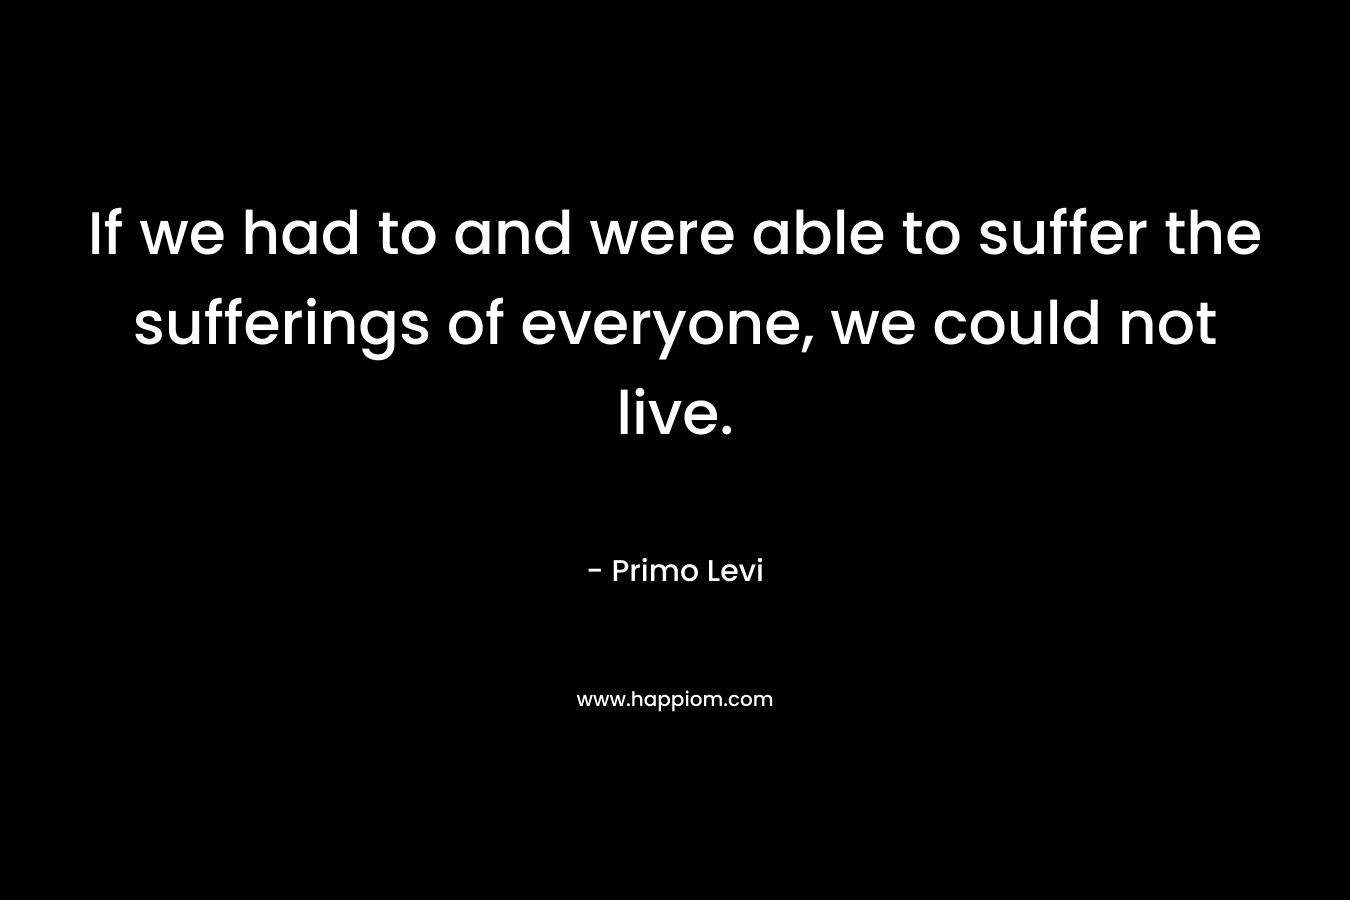 If we had to and were able to suffer the sufferings of everyone, we could not live.